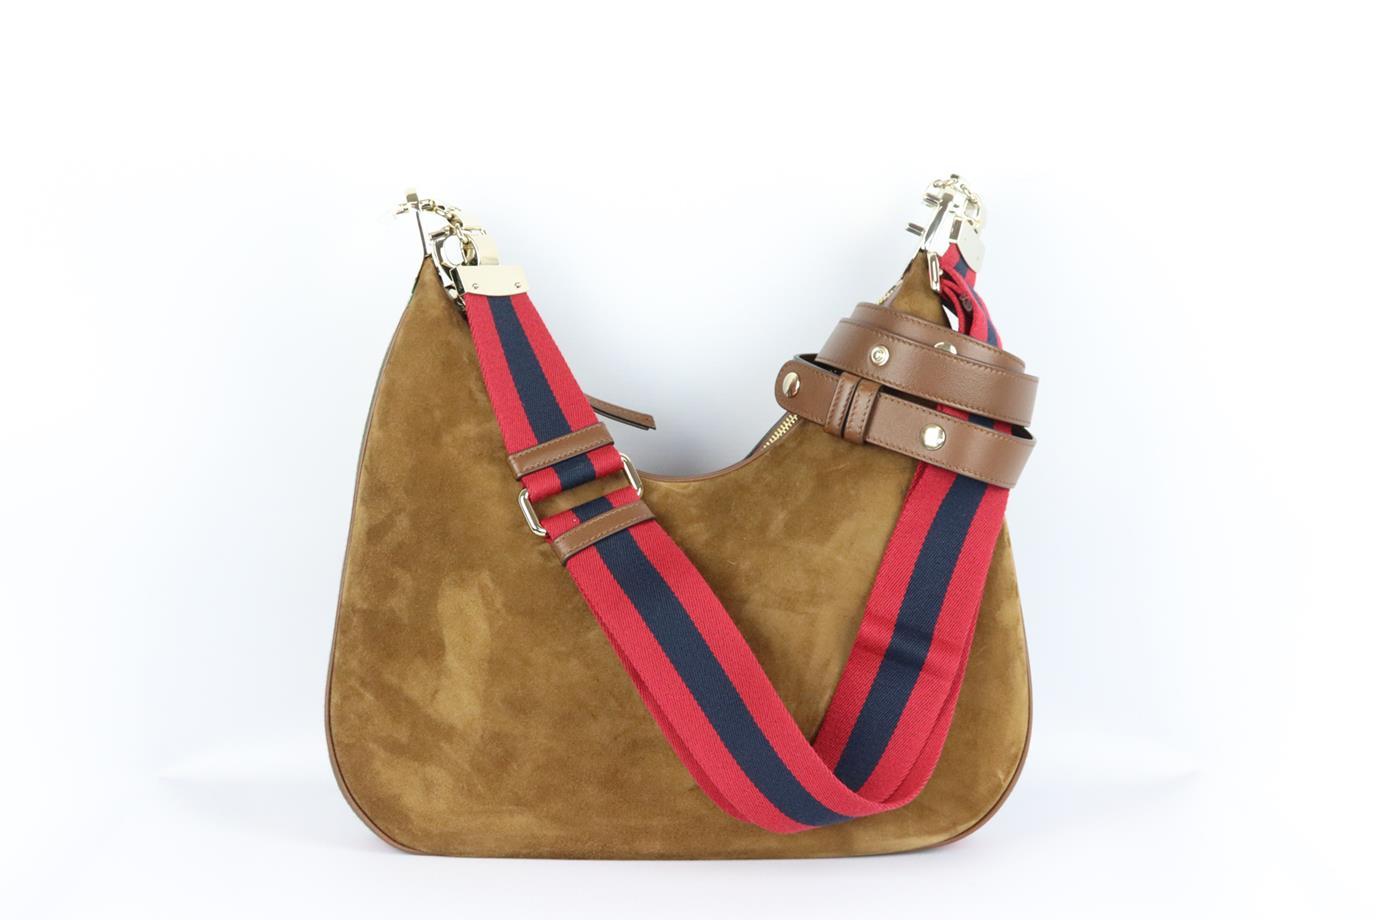 Gucci Attache large webbing trimmed suede shoulder bag. Brown, green, navy and red. Zip fastening at top. Comes with dustbag and additional shoulder strap. Protective plastic attached. Height: 13 in. Width: 13.6 in. Depth: 2 in. Strap Drop: 19 in.